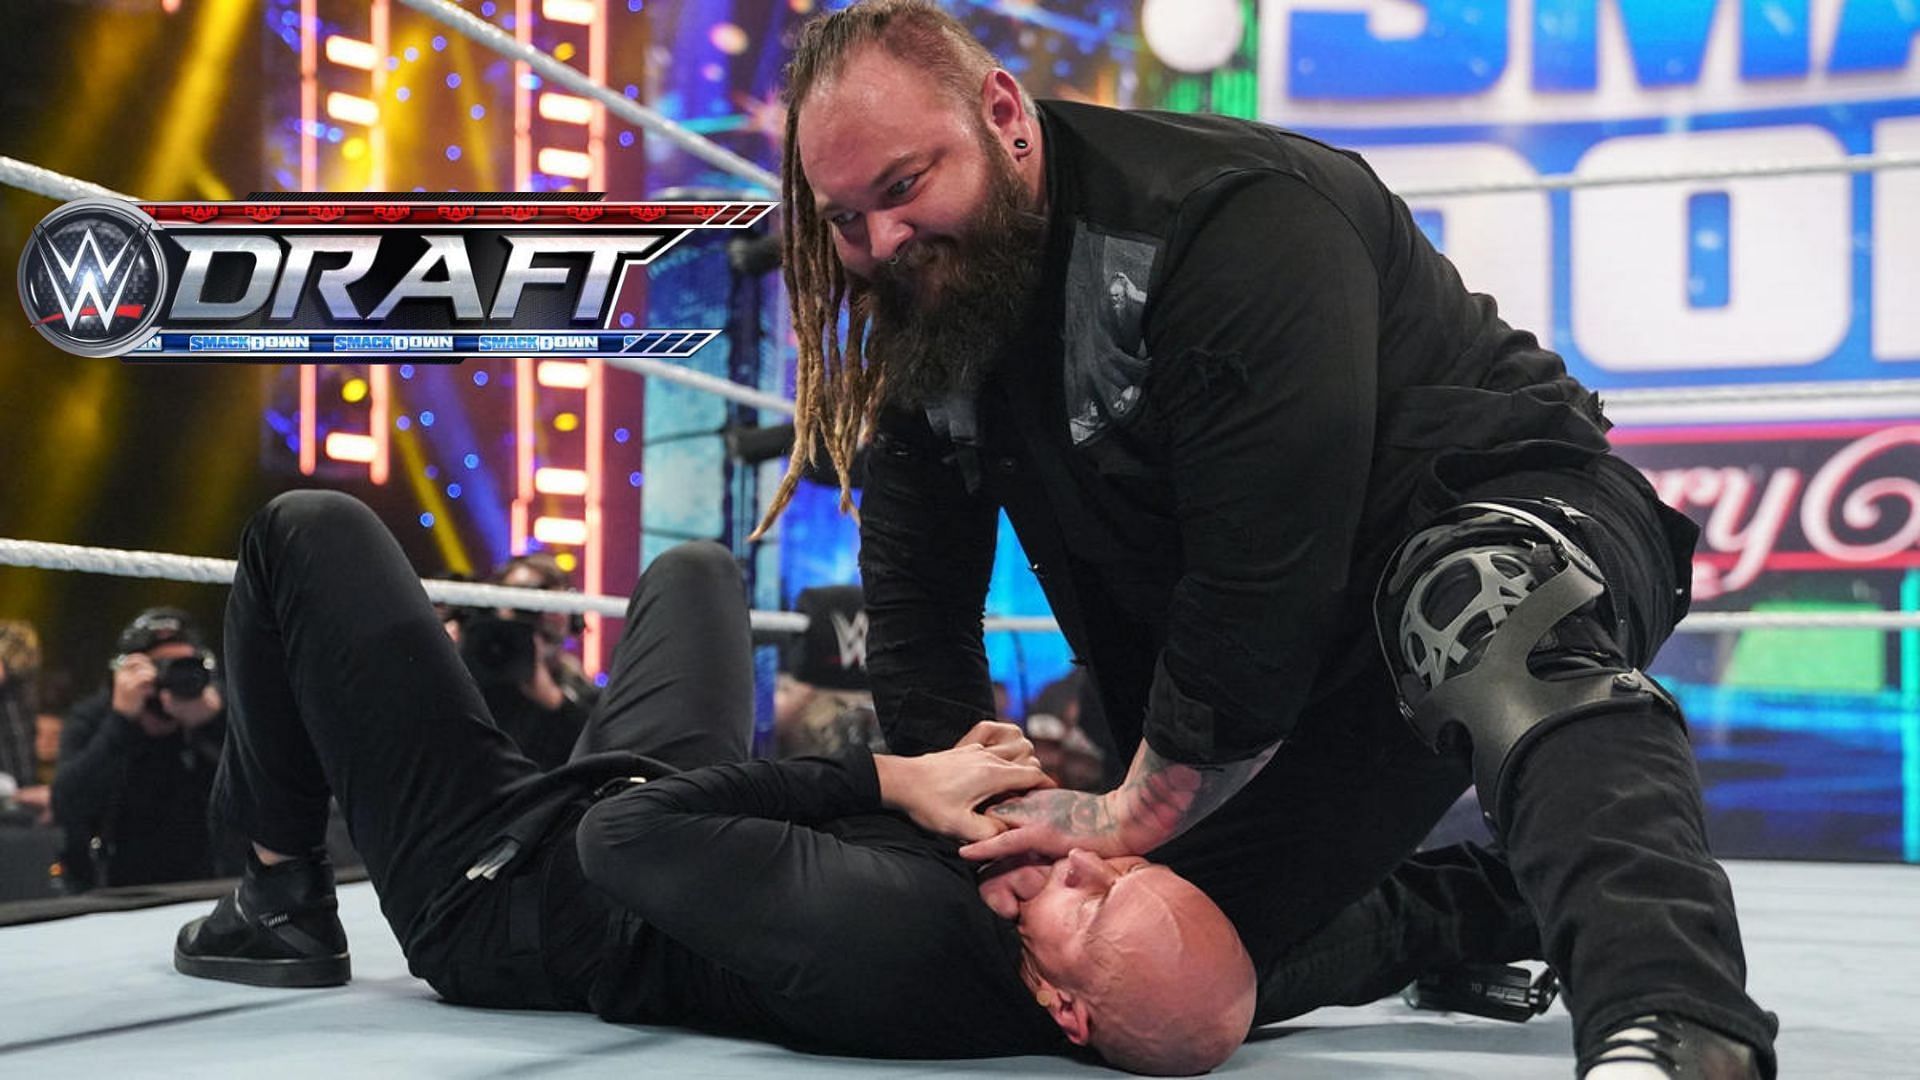 Bray Wyatt is dealing with health issues.